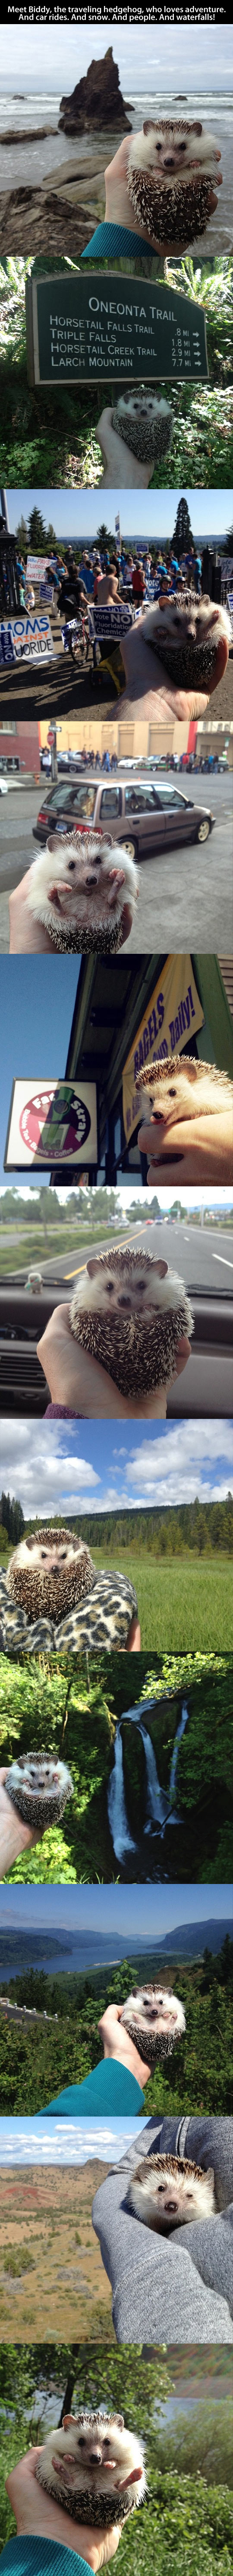 Meet Biddy, the traveling hedghog, who loves to adventure...